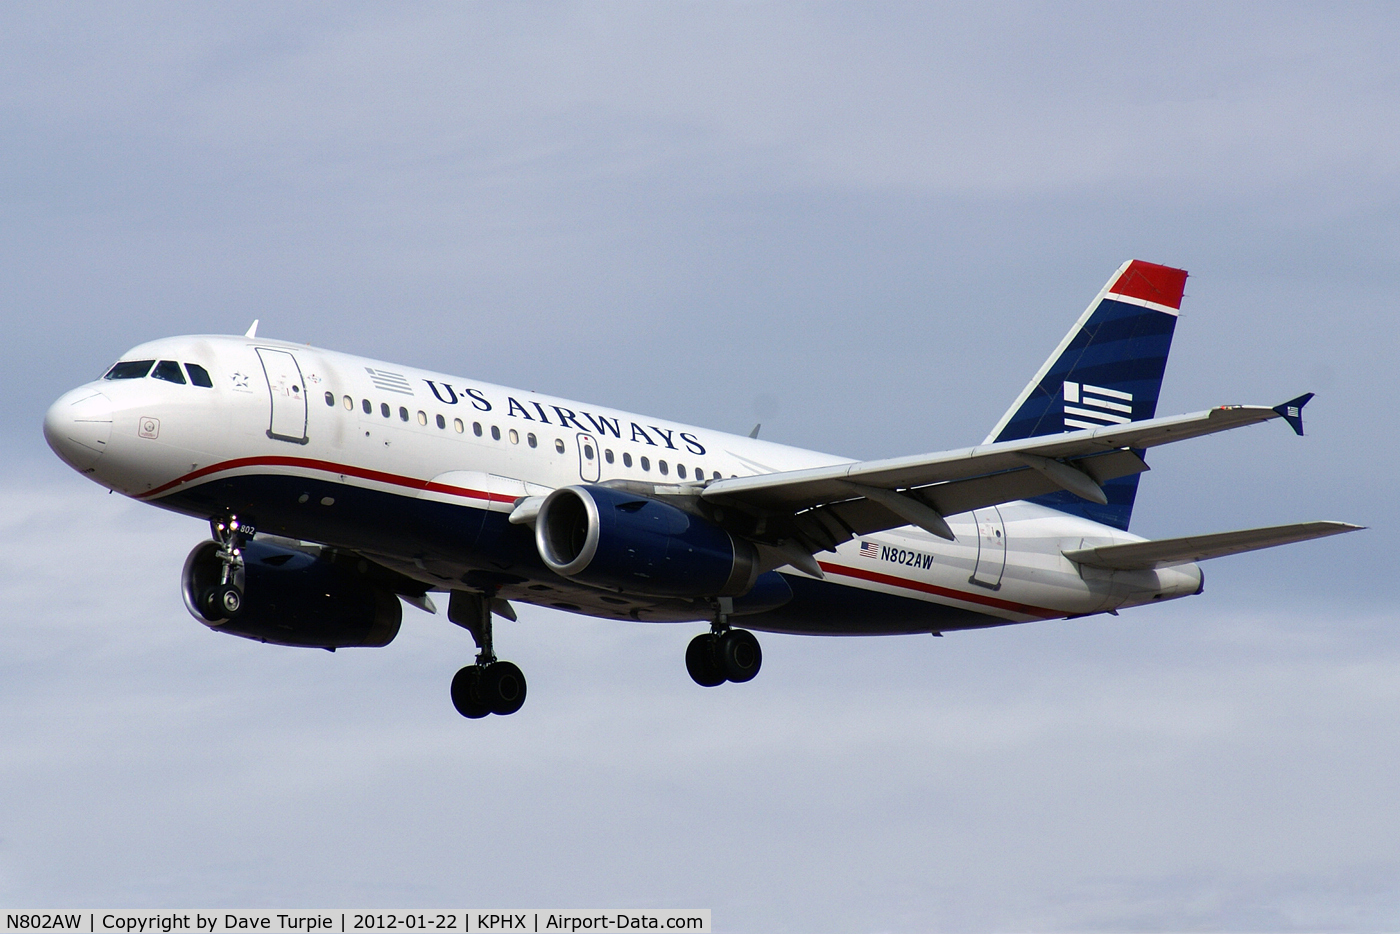 N802AW, 1998 Airbus A319-132 C/N 0924, No comment.